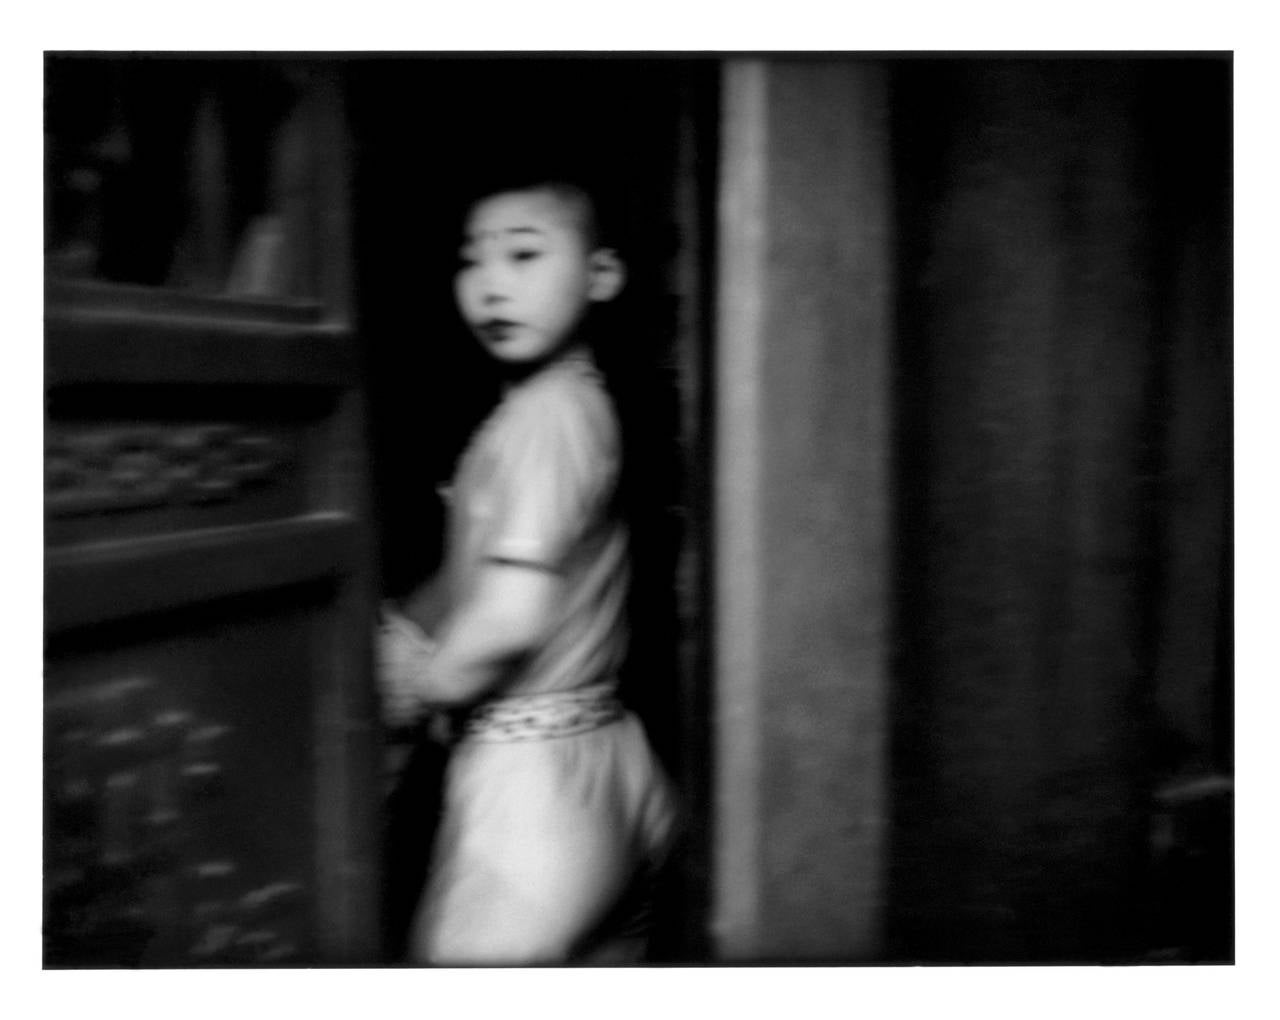 Suspicious glance from a young theatrical performer, Beijing, China